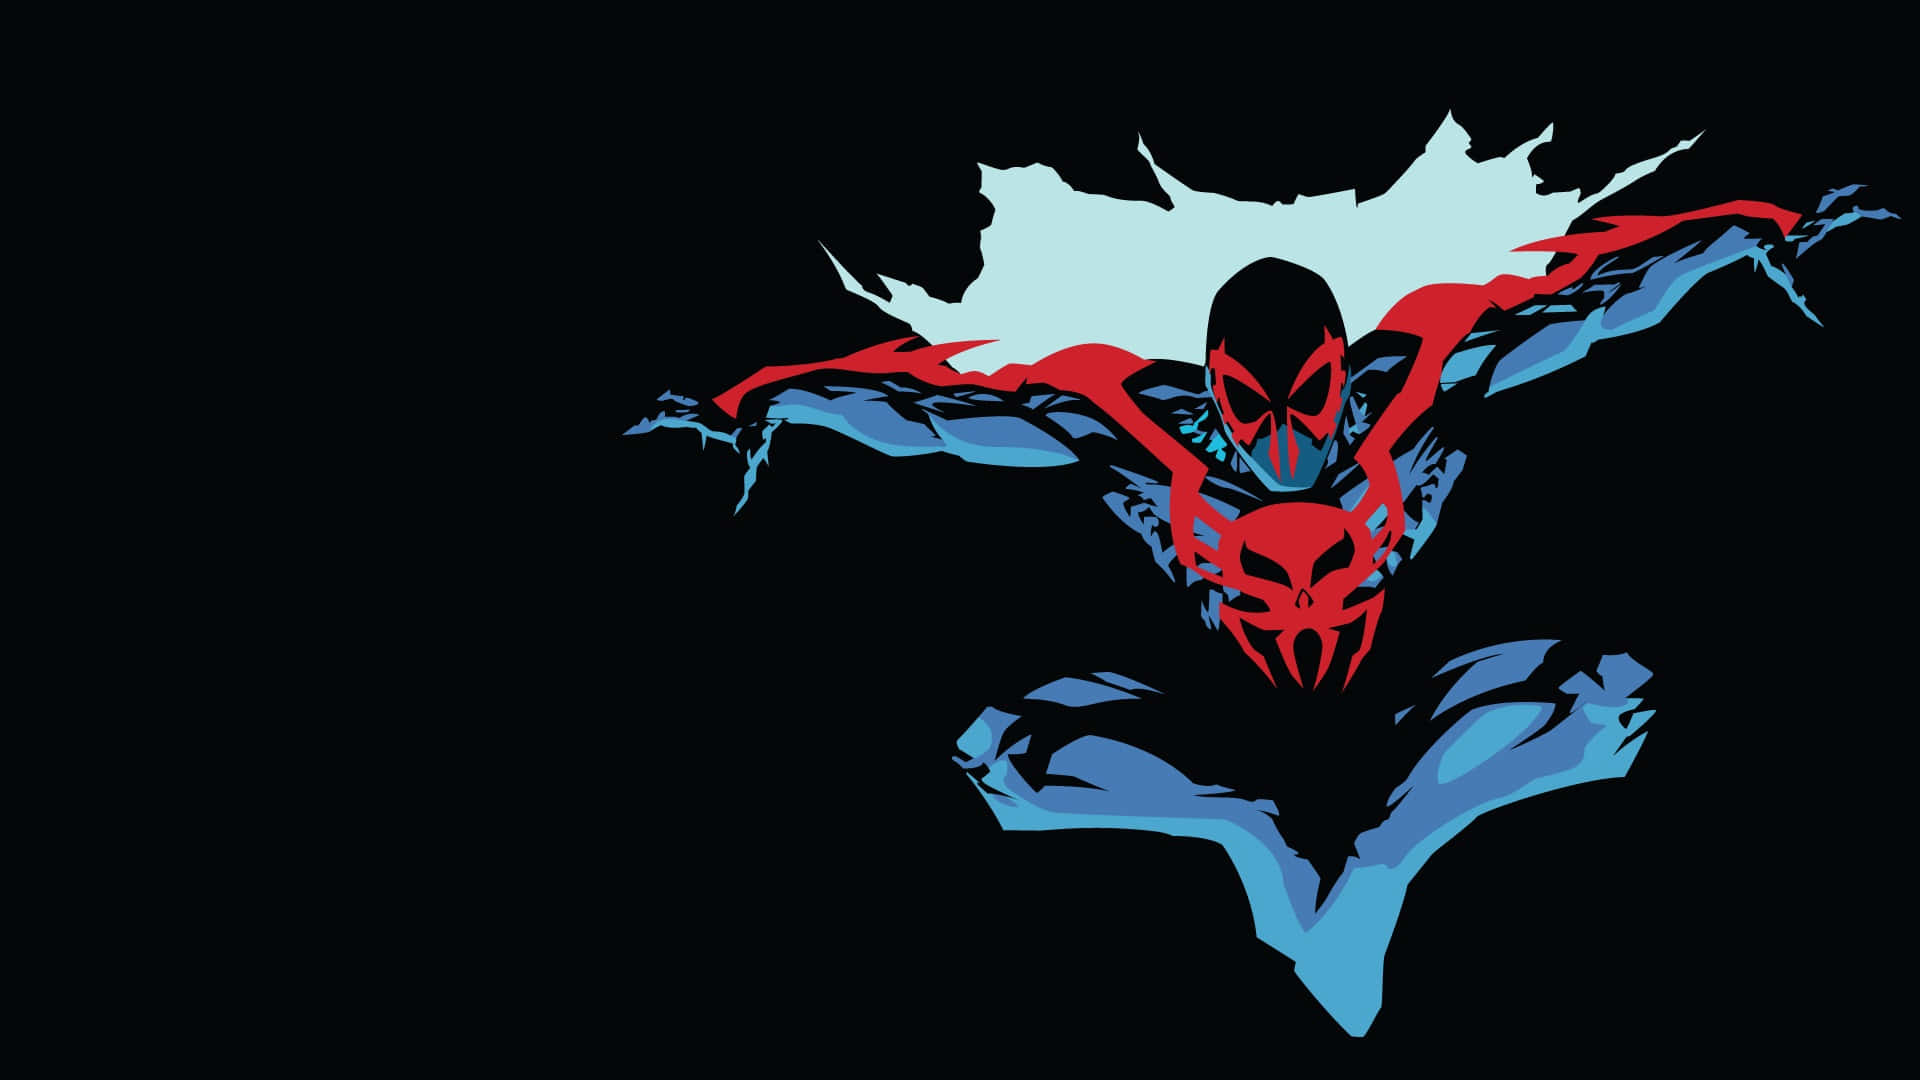 20 SpiderMan 2099 HD Wallpapers and Backgrounds